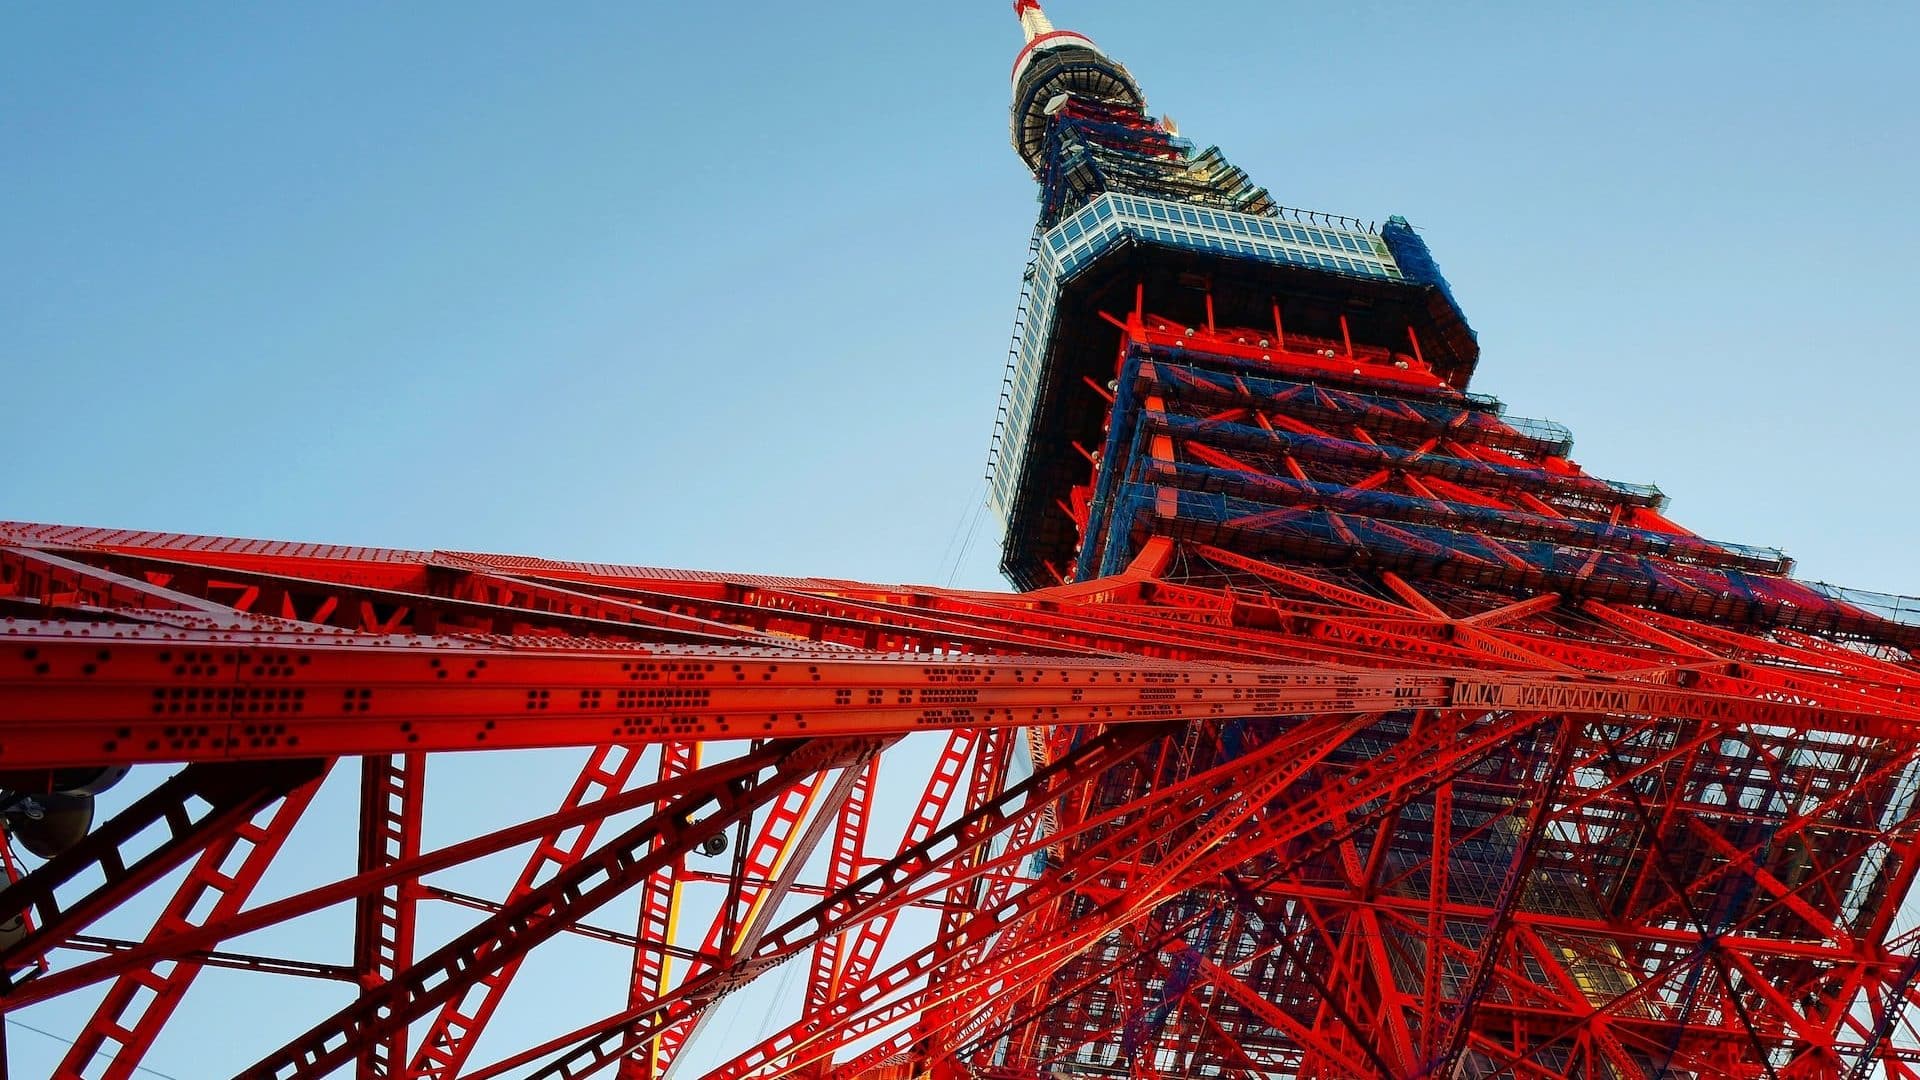 The Tokyo Tower is the most famous icon in Minato Ward